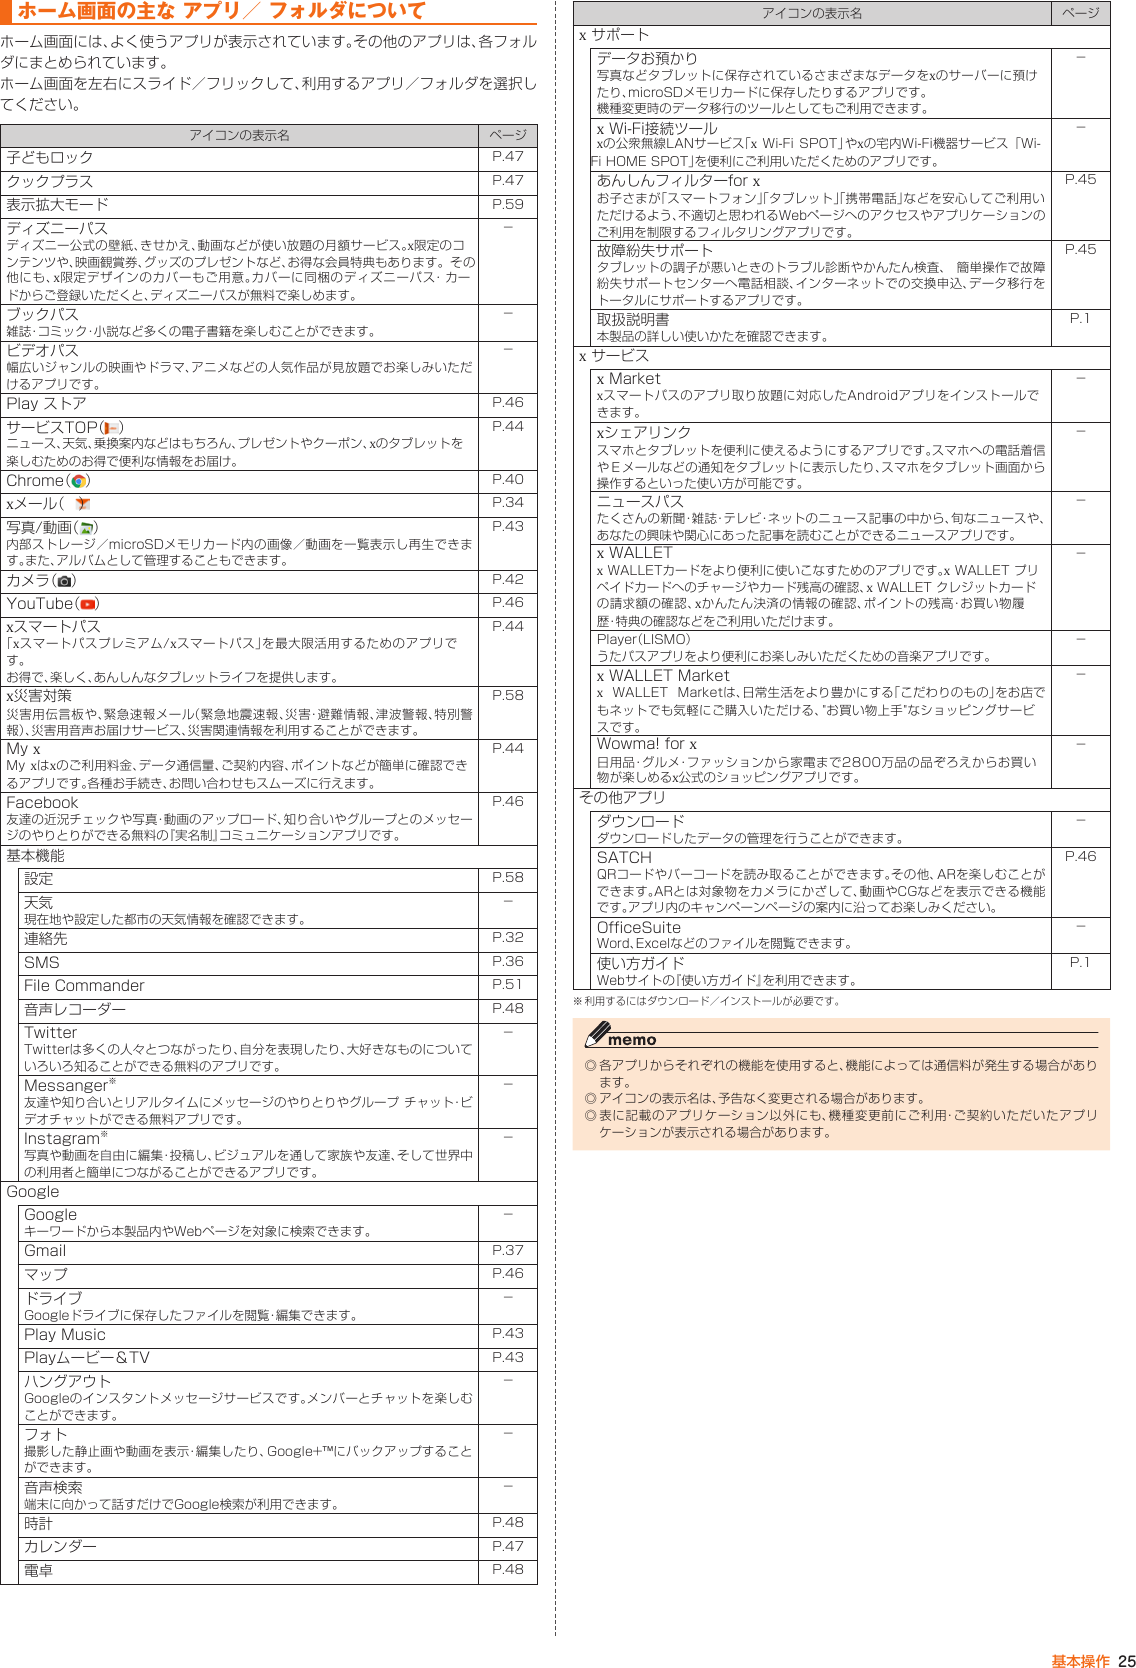 Page 23 of Kyocera FA51 Tablet User Manual part 2